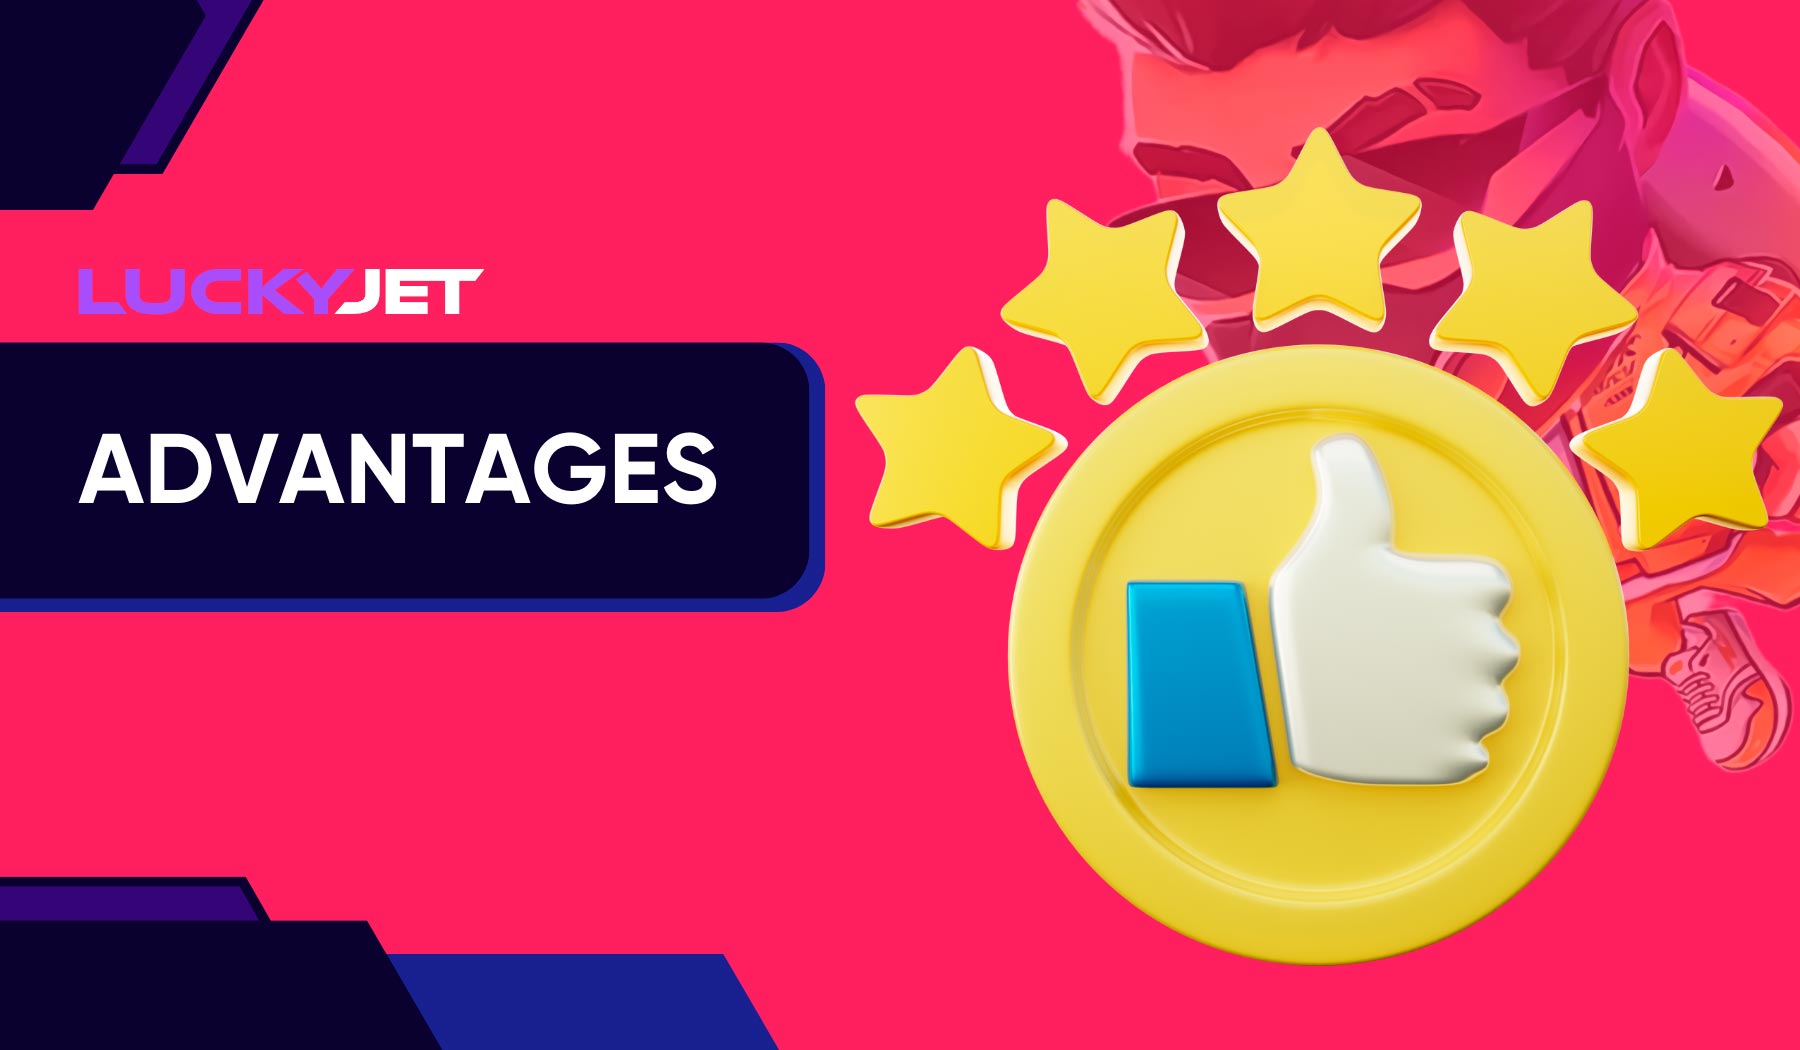 What are the Benefits of Parimatch Lucky Jet